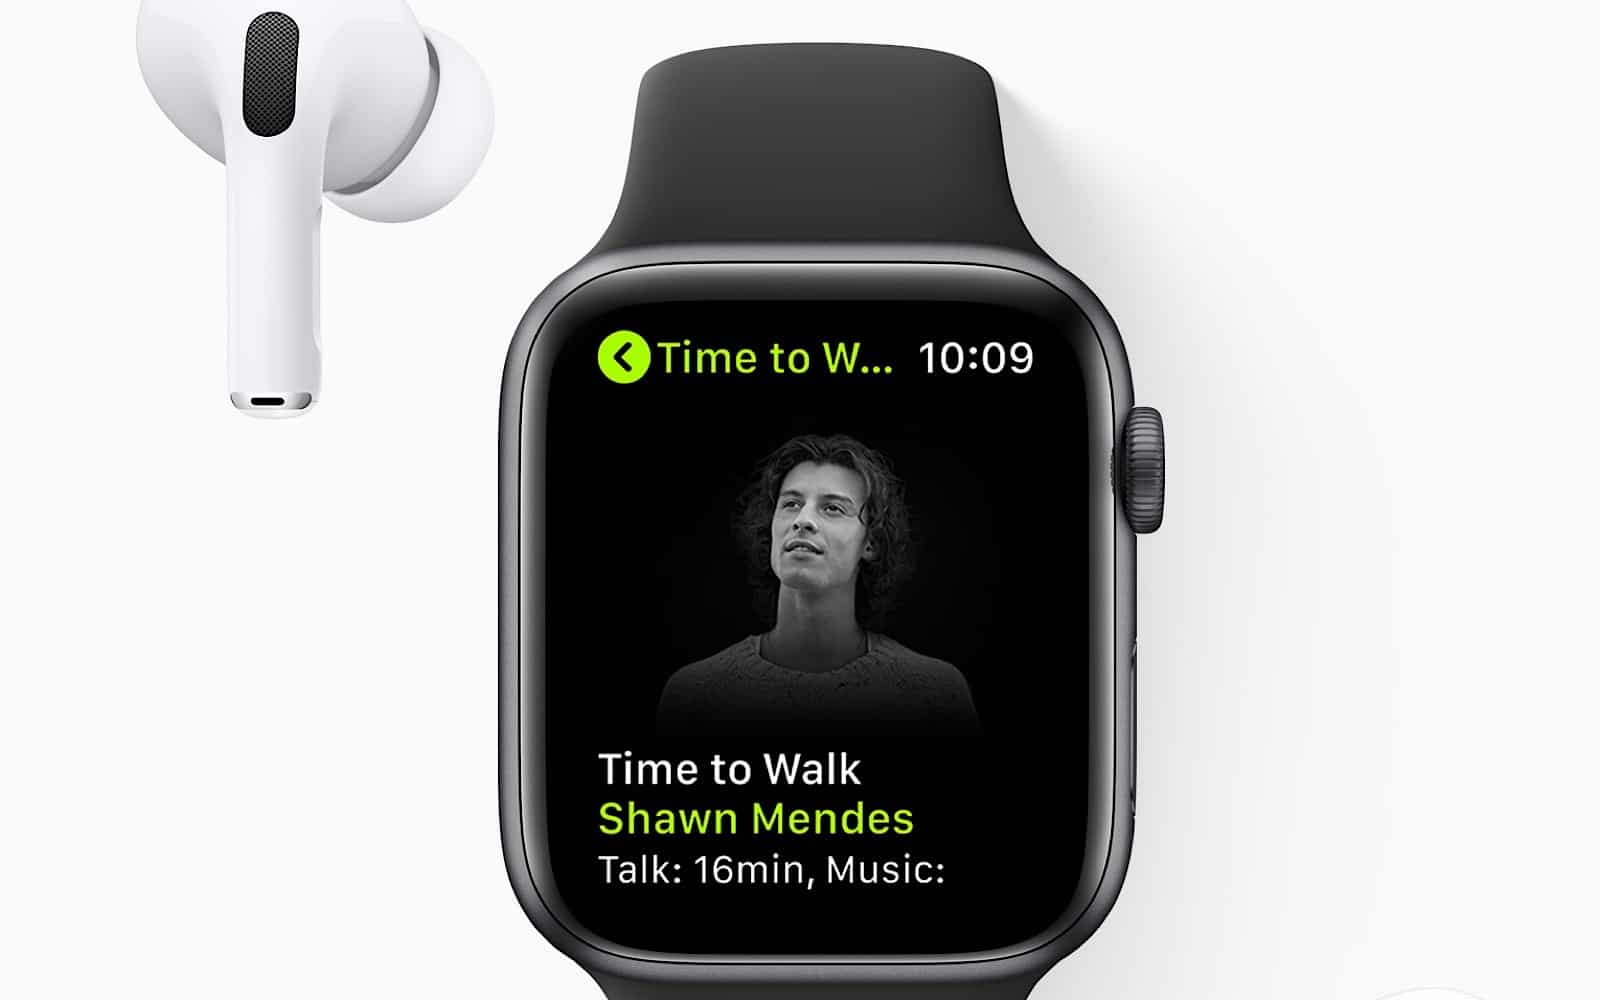 Apple Fitness+ Time to Walk feature, added January 2021